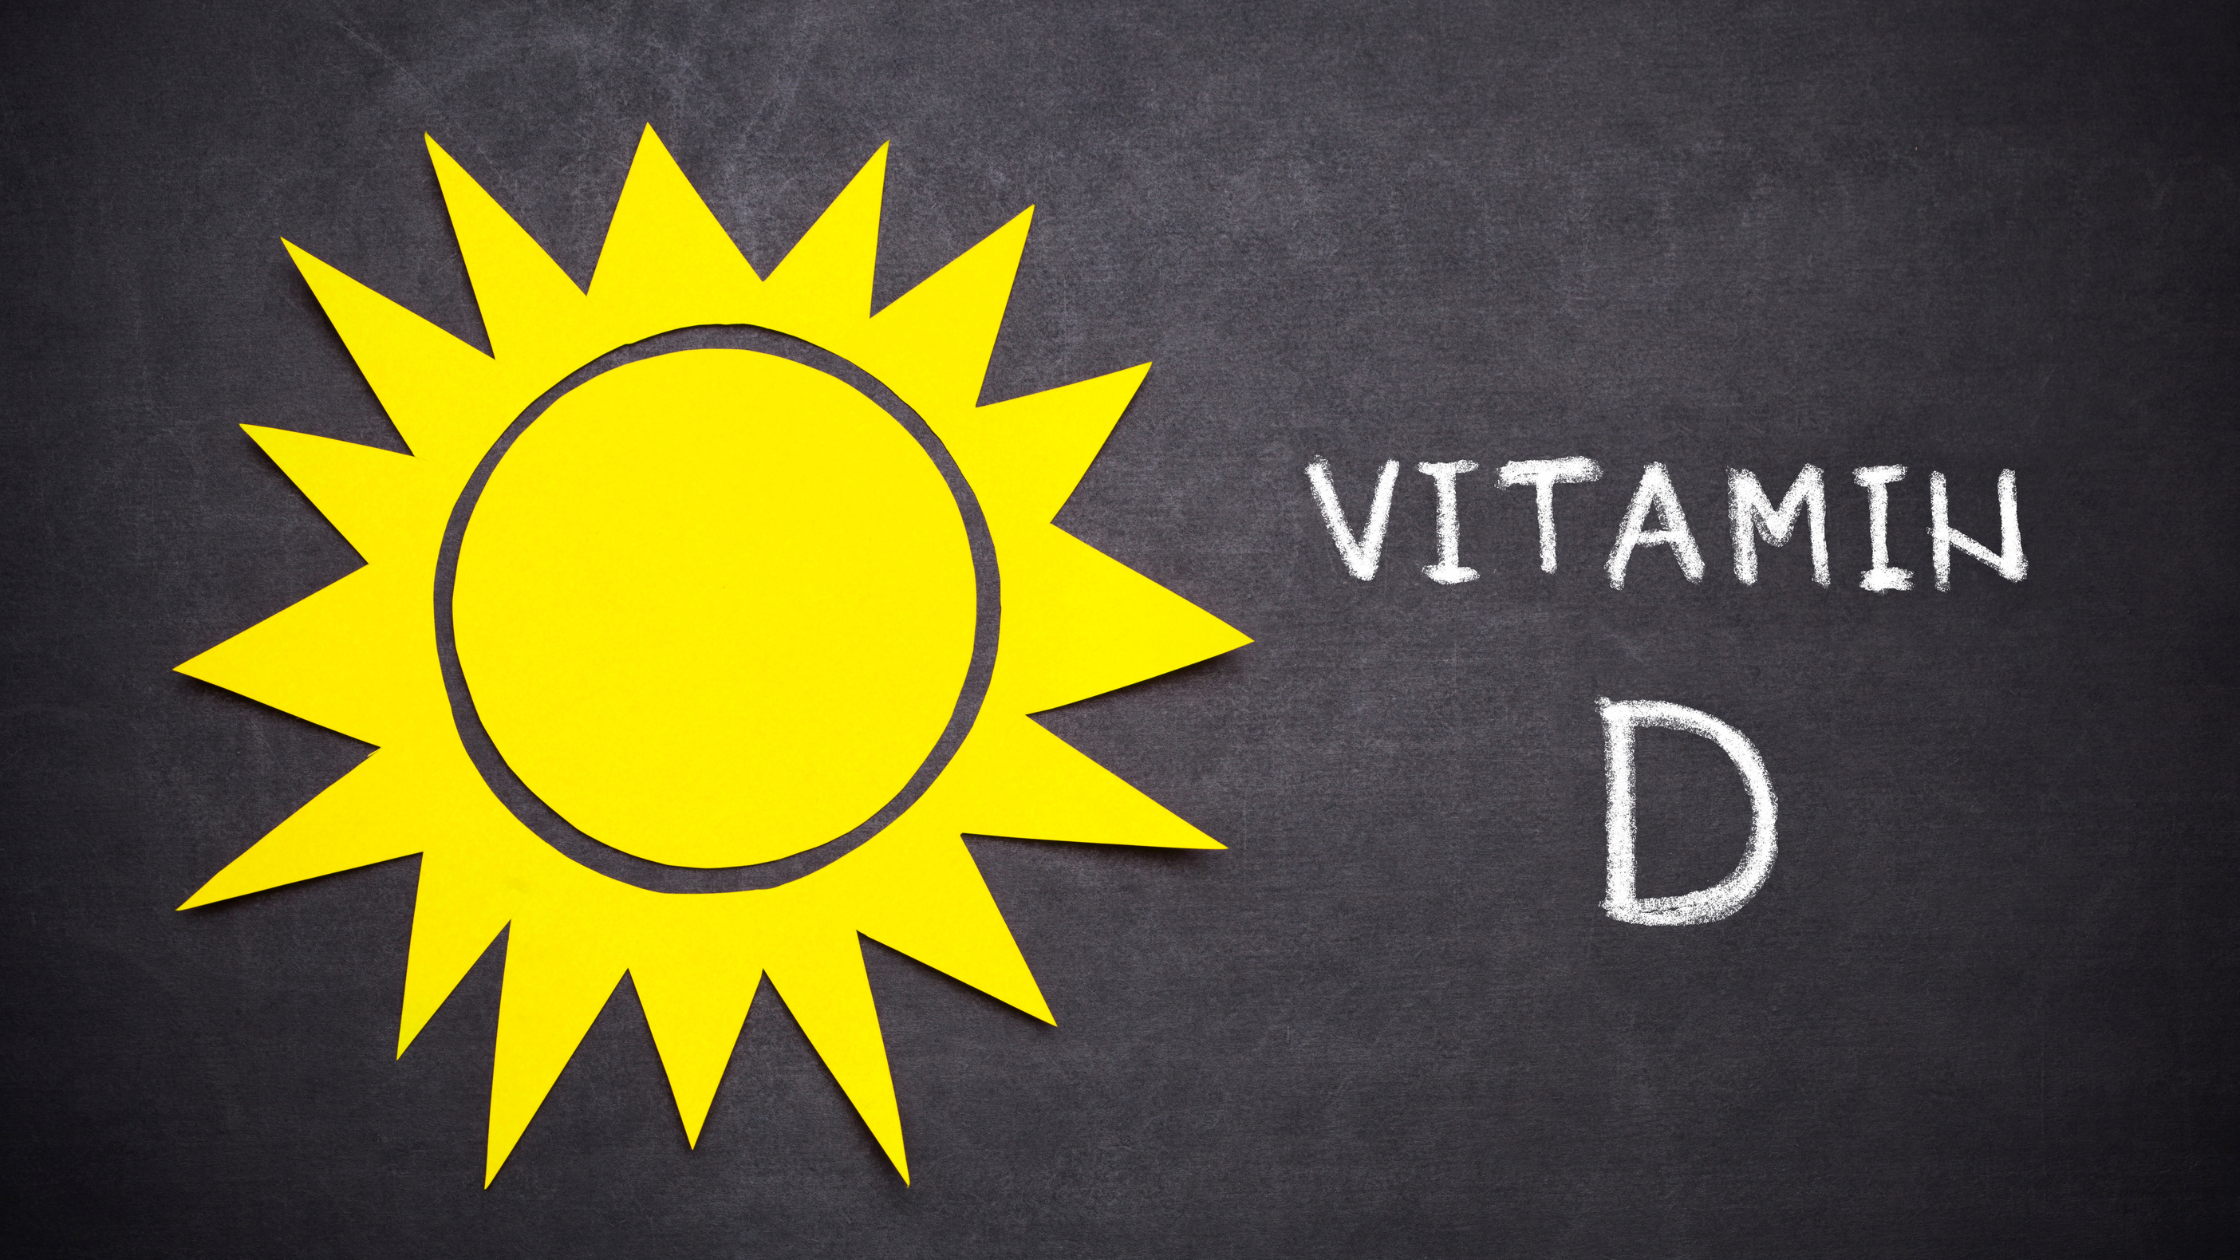 drawing of the sun next to words "Vitamin D"